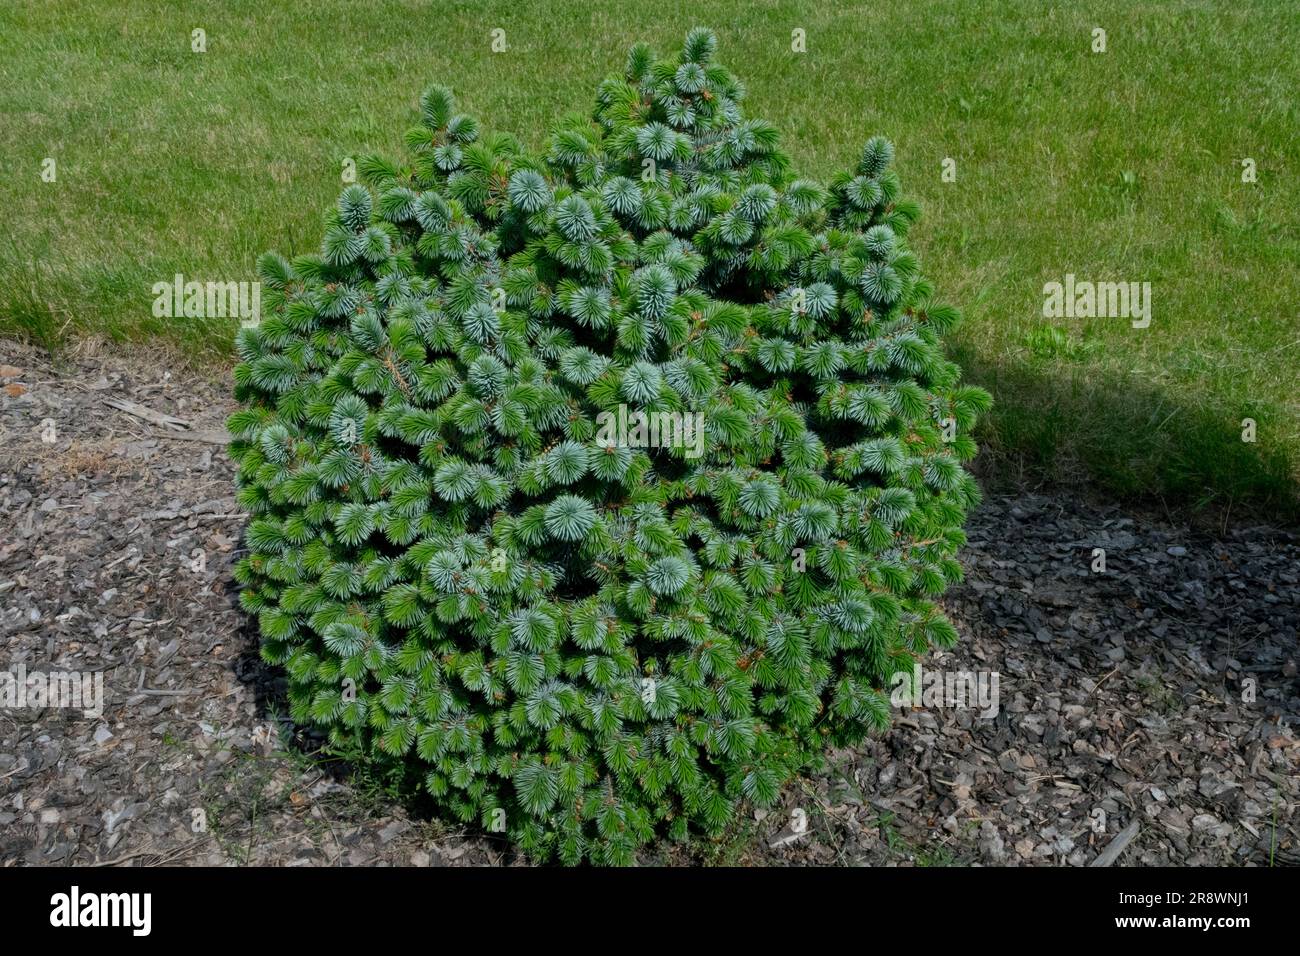 Tree, Dwarf, Evergreen, Sitka Spruce, Picea sitchensis 'Papoose', Spherical, Form, Spruce Stock Photo